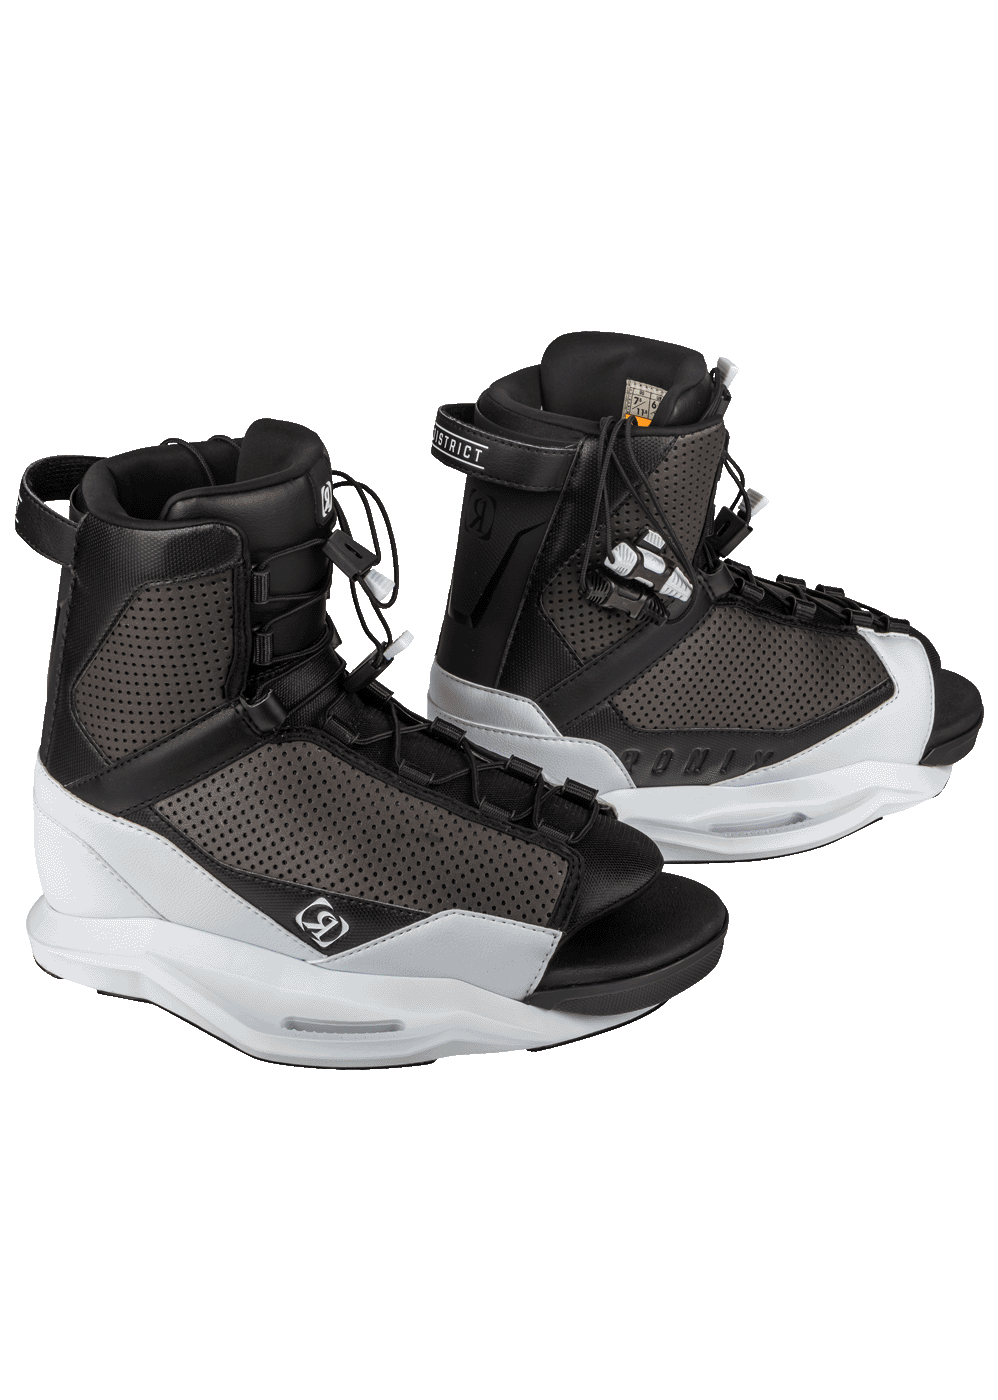 RONIX DISTRICT BOOTS